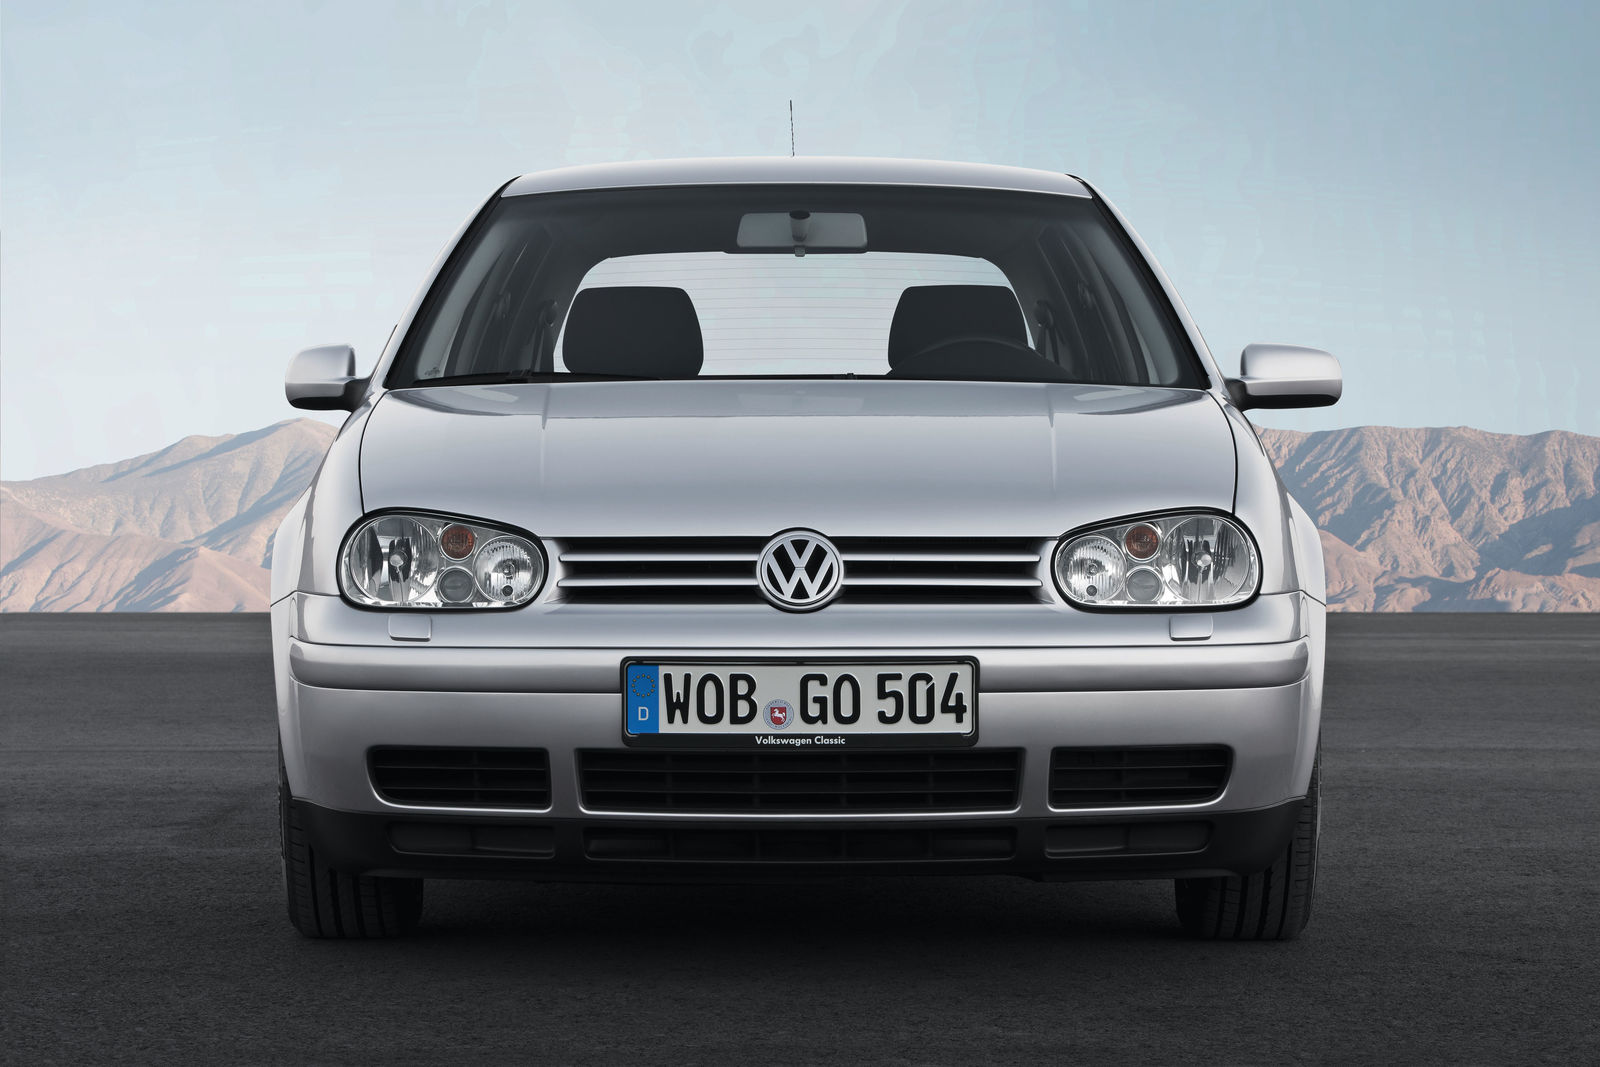 Markeret Bloom skuffet Countdown to the new Golf: Golf Mk 4 – the style icon | Volkswagen Newsroom